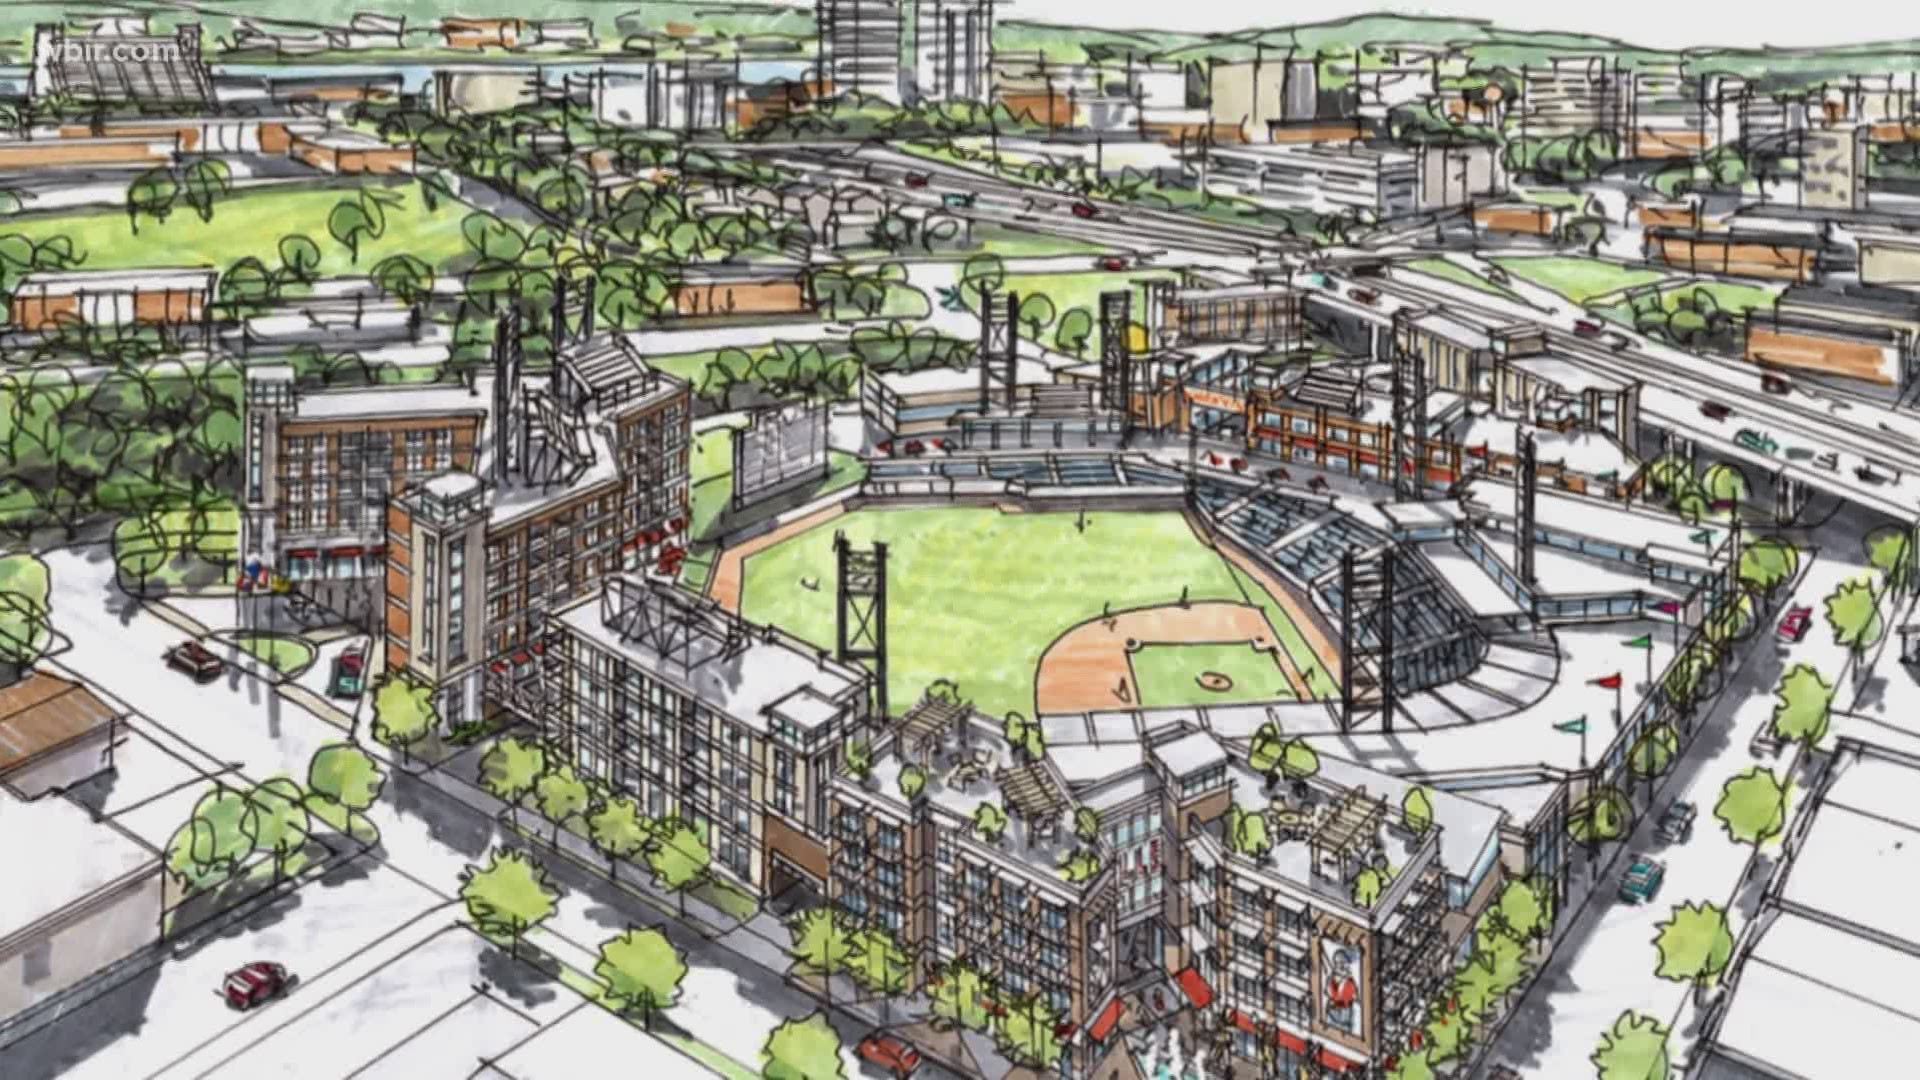 City and county leaders are set to talk about the possible creation of a sports authority to build a Knoxville baseball stadium in the Old City.